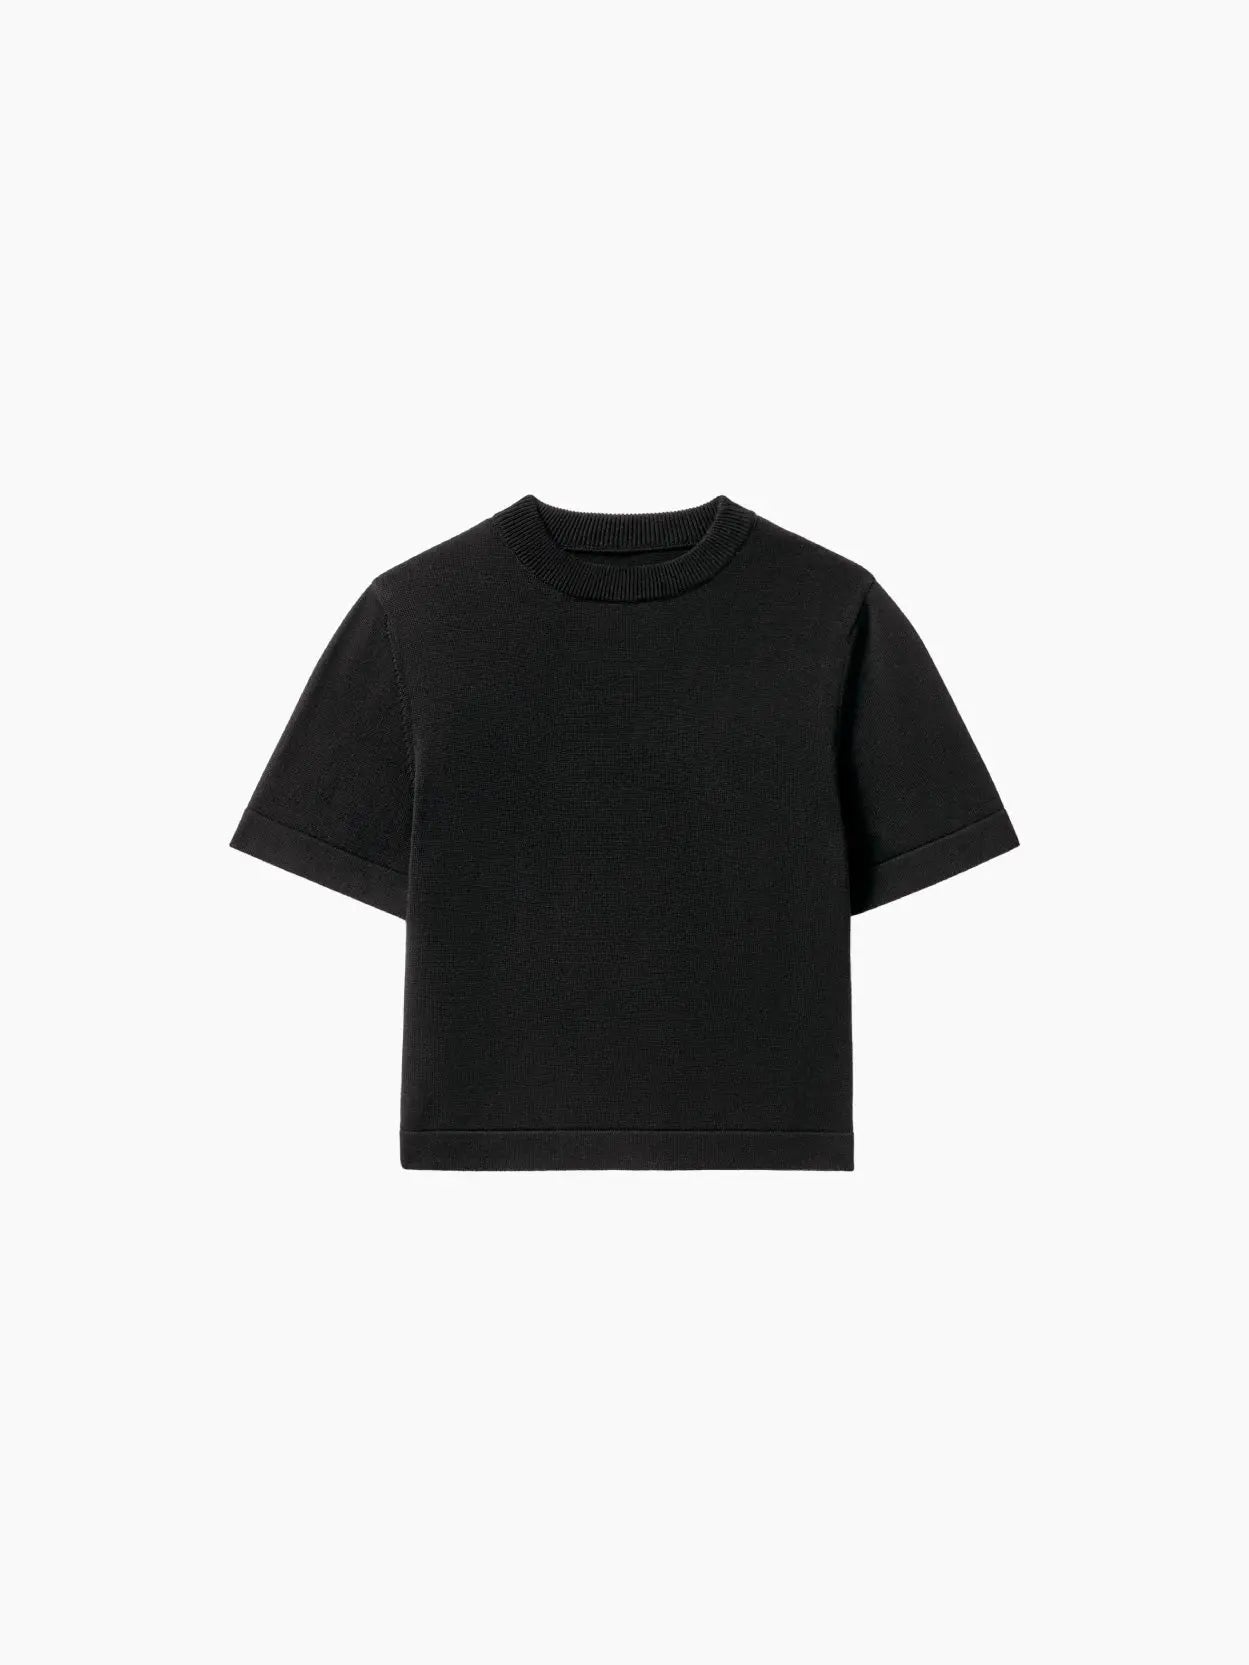 A Cordera Cotton T-Shirt Black is displayed on a white background. The shirt features a round neckline and a simple, classic design with no visible logos or patterns, perfect for your next visit to BassalStore in Barcelona.